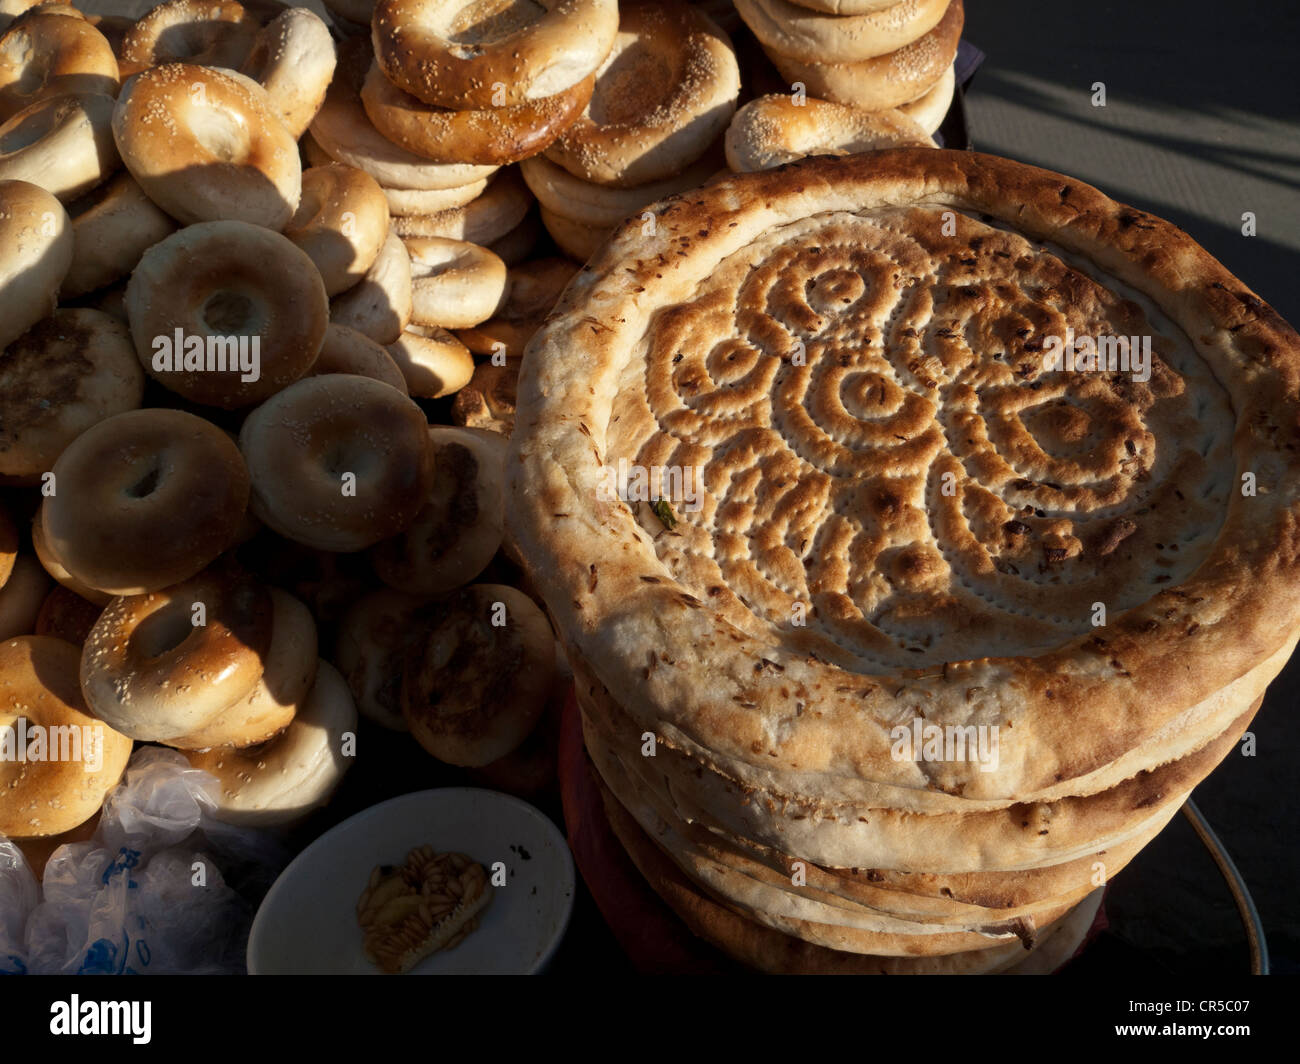 Uigur bread, made in the tandoori oven and sold in the streets of Kashgar, Xinjiang, China, Asia Stock Photo